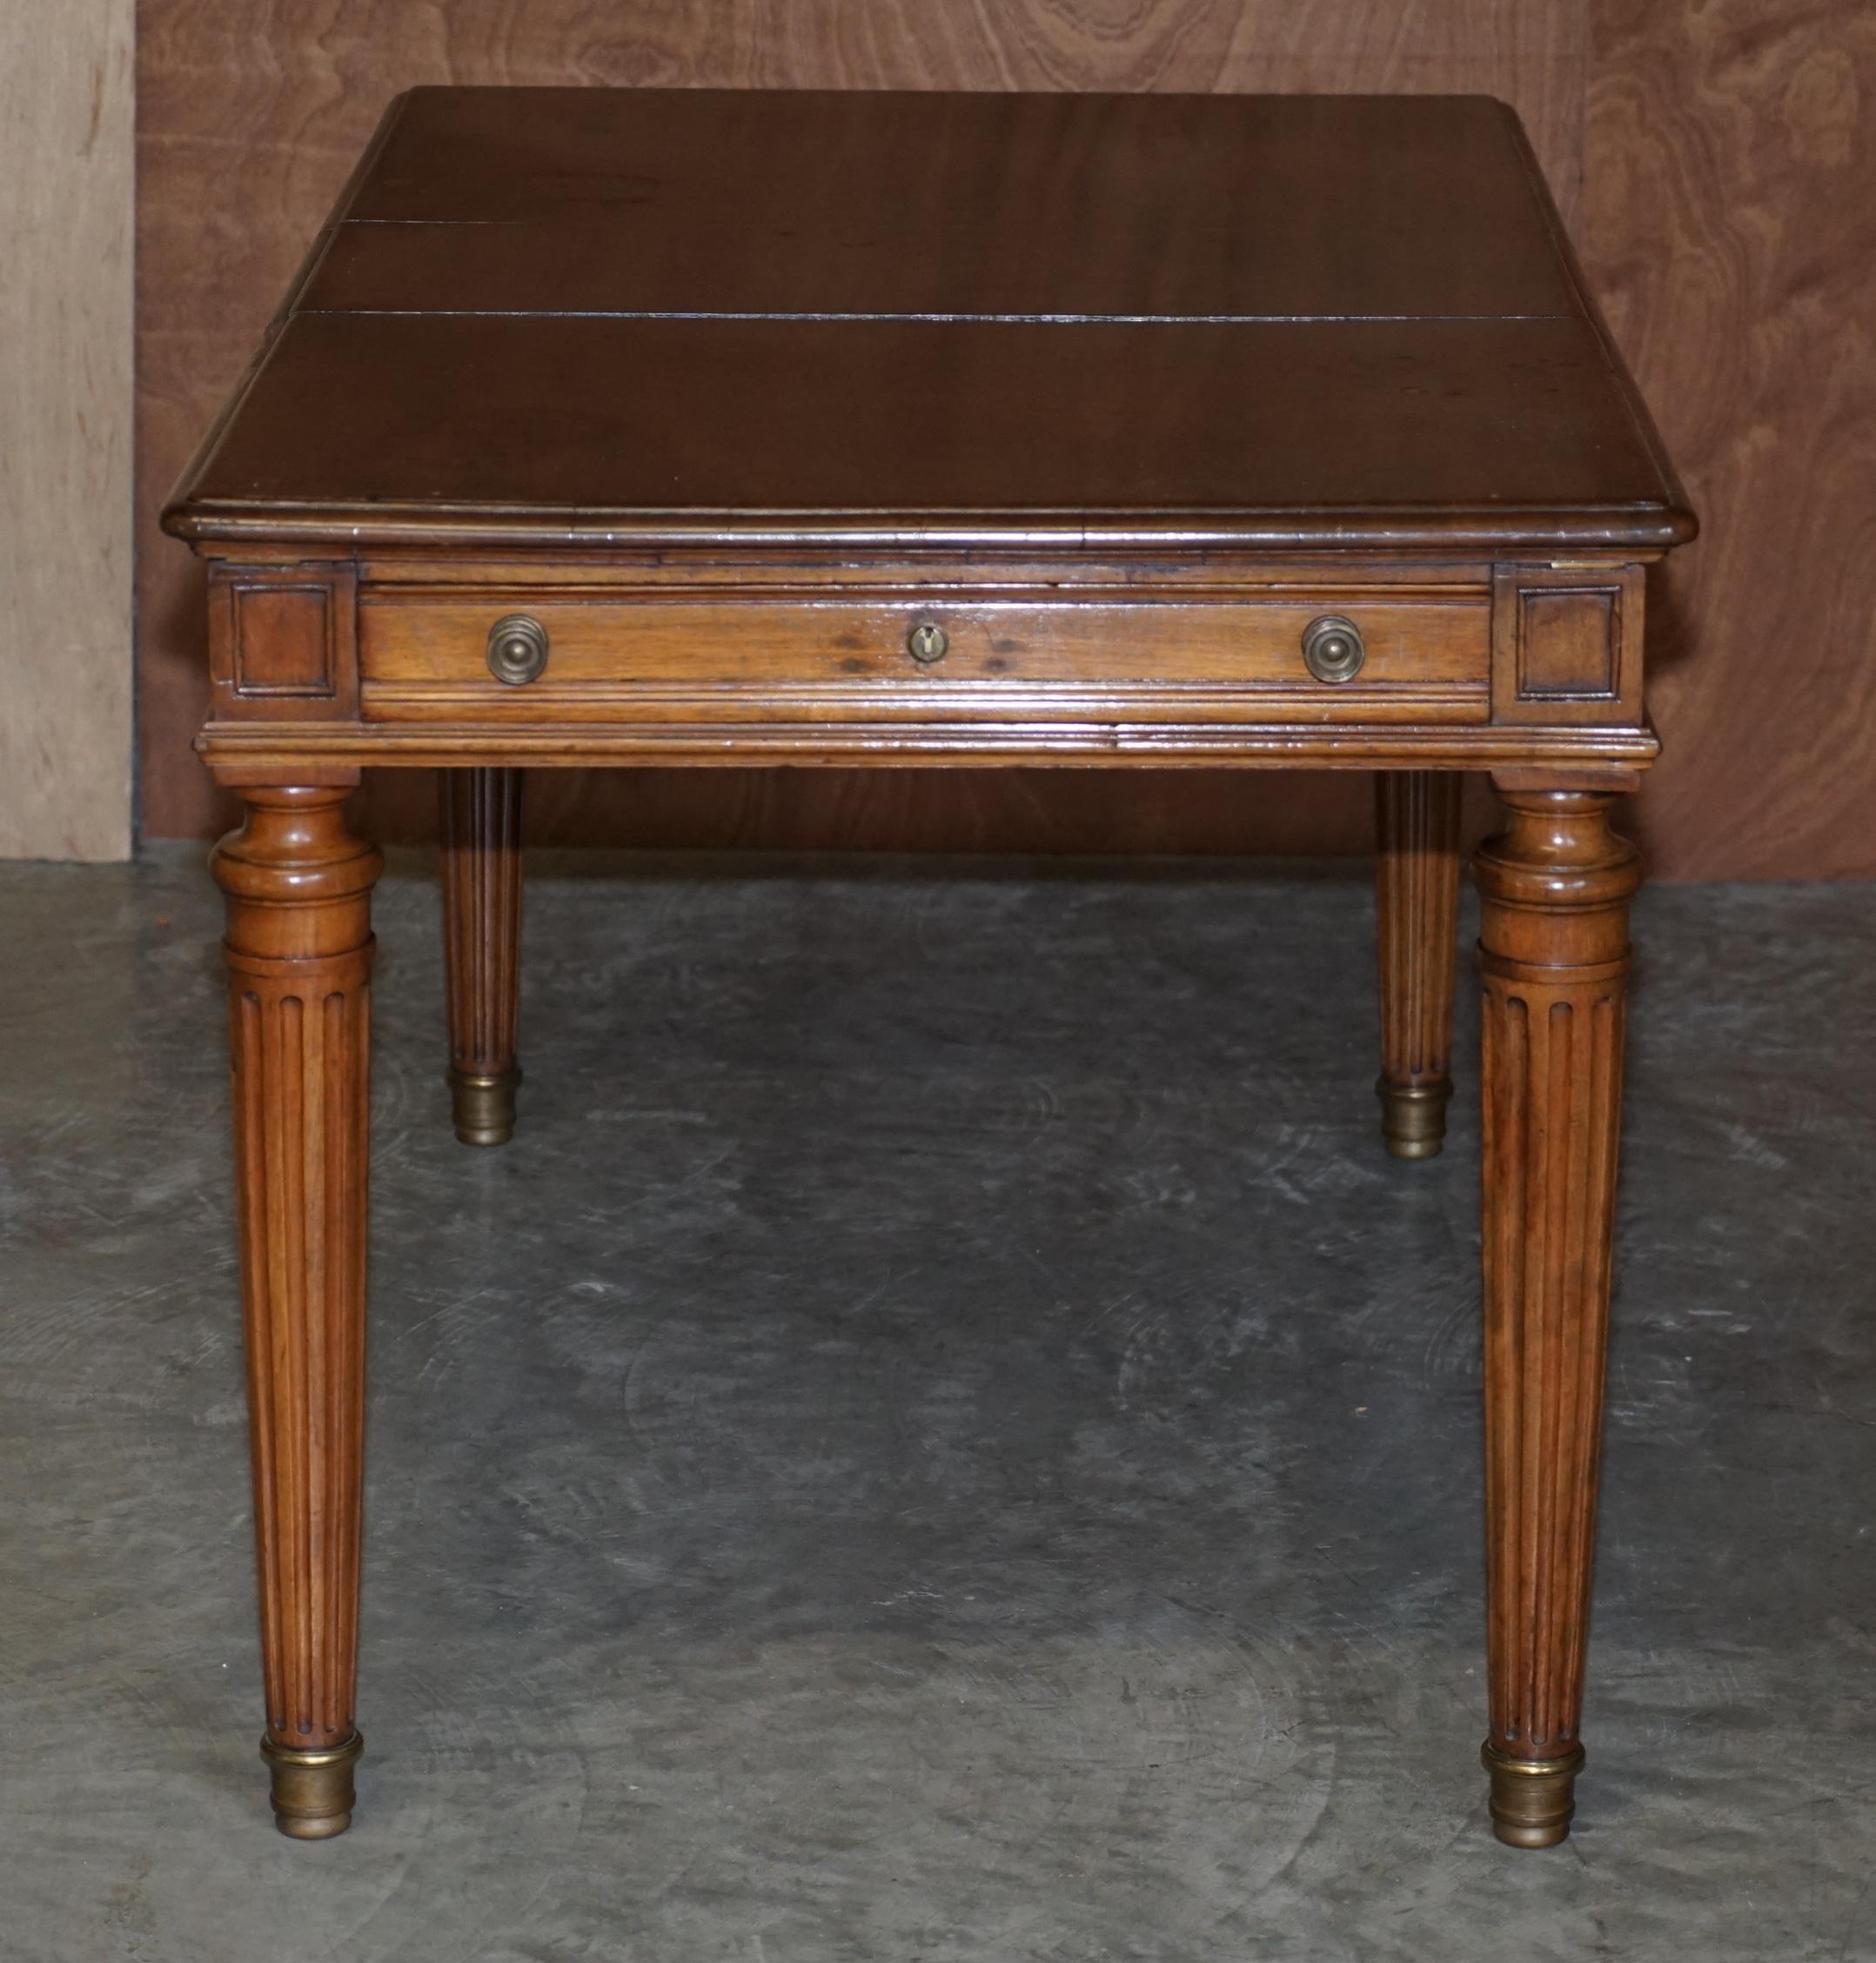 Hardwood Rare Antique circa 1860 Library Writing Table Desk with Twin Writing Slopes For Sale